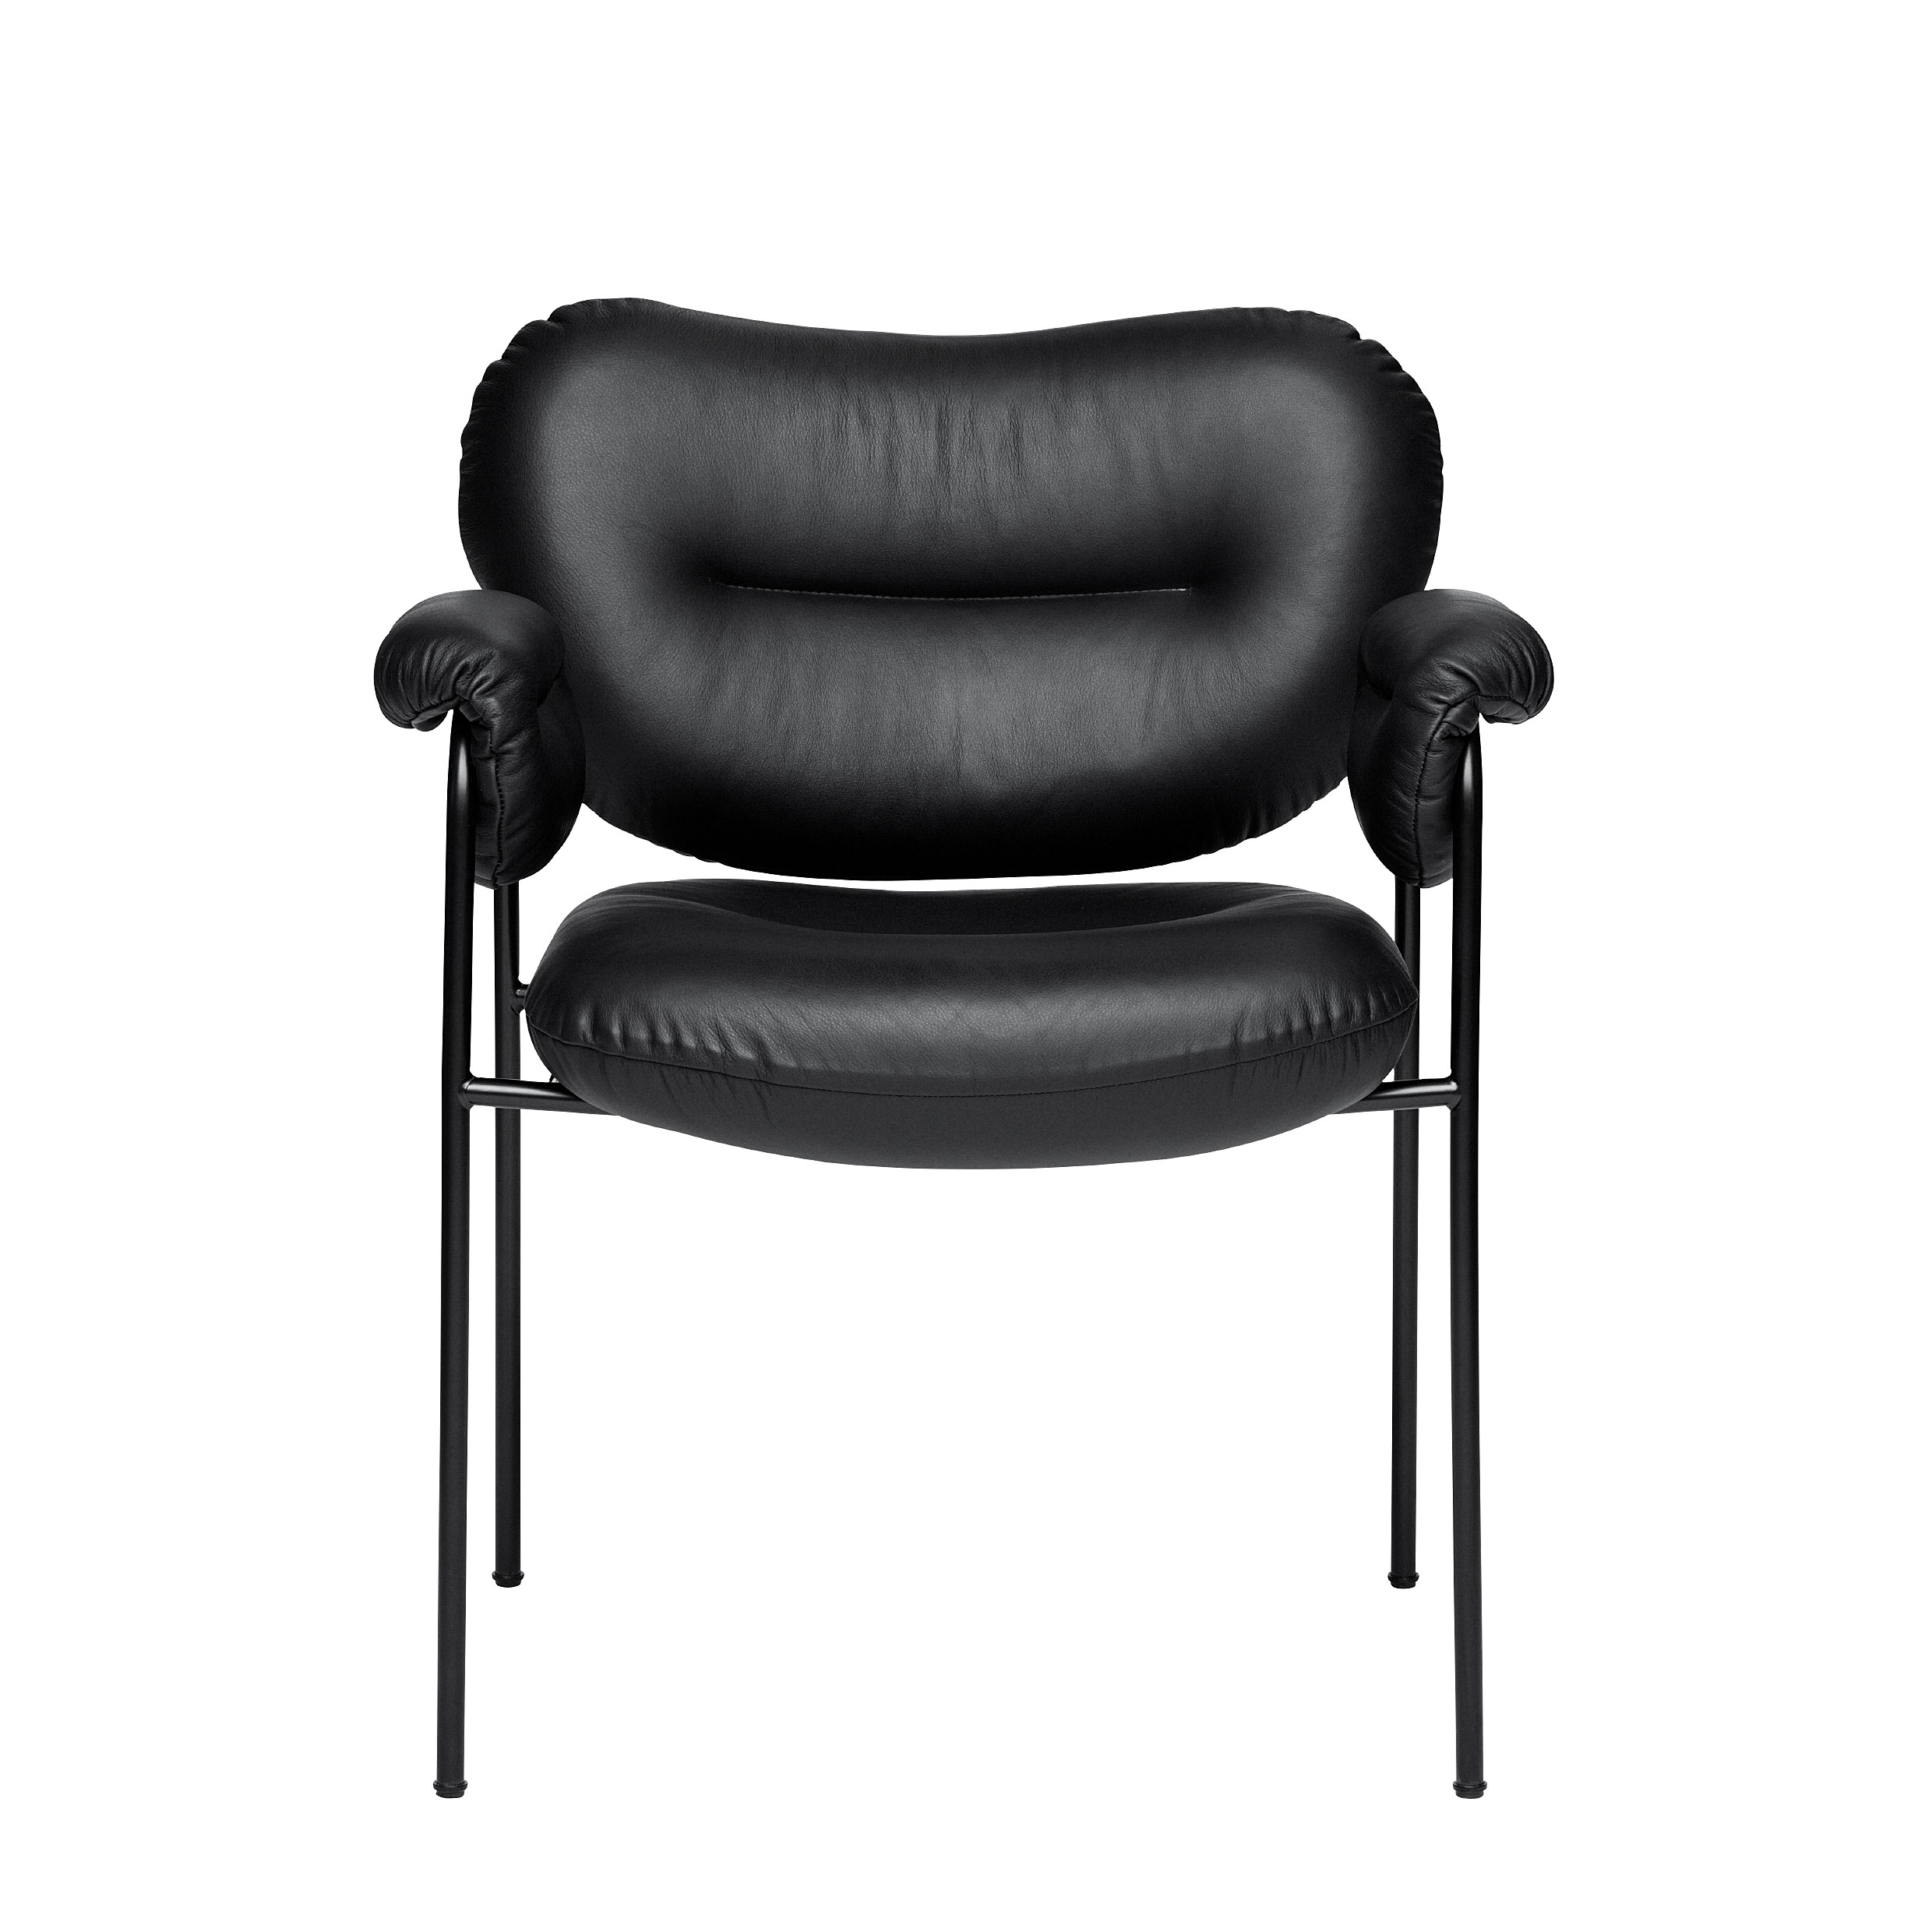 FOGIA // SPISOLINI DINING CHAIR - DINING CHAIR | BLACK